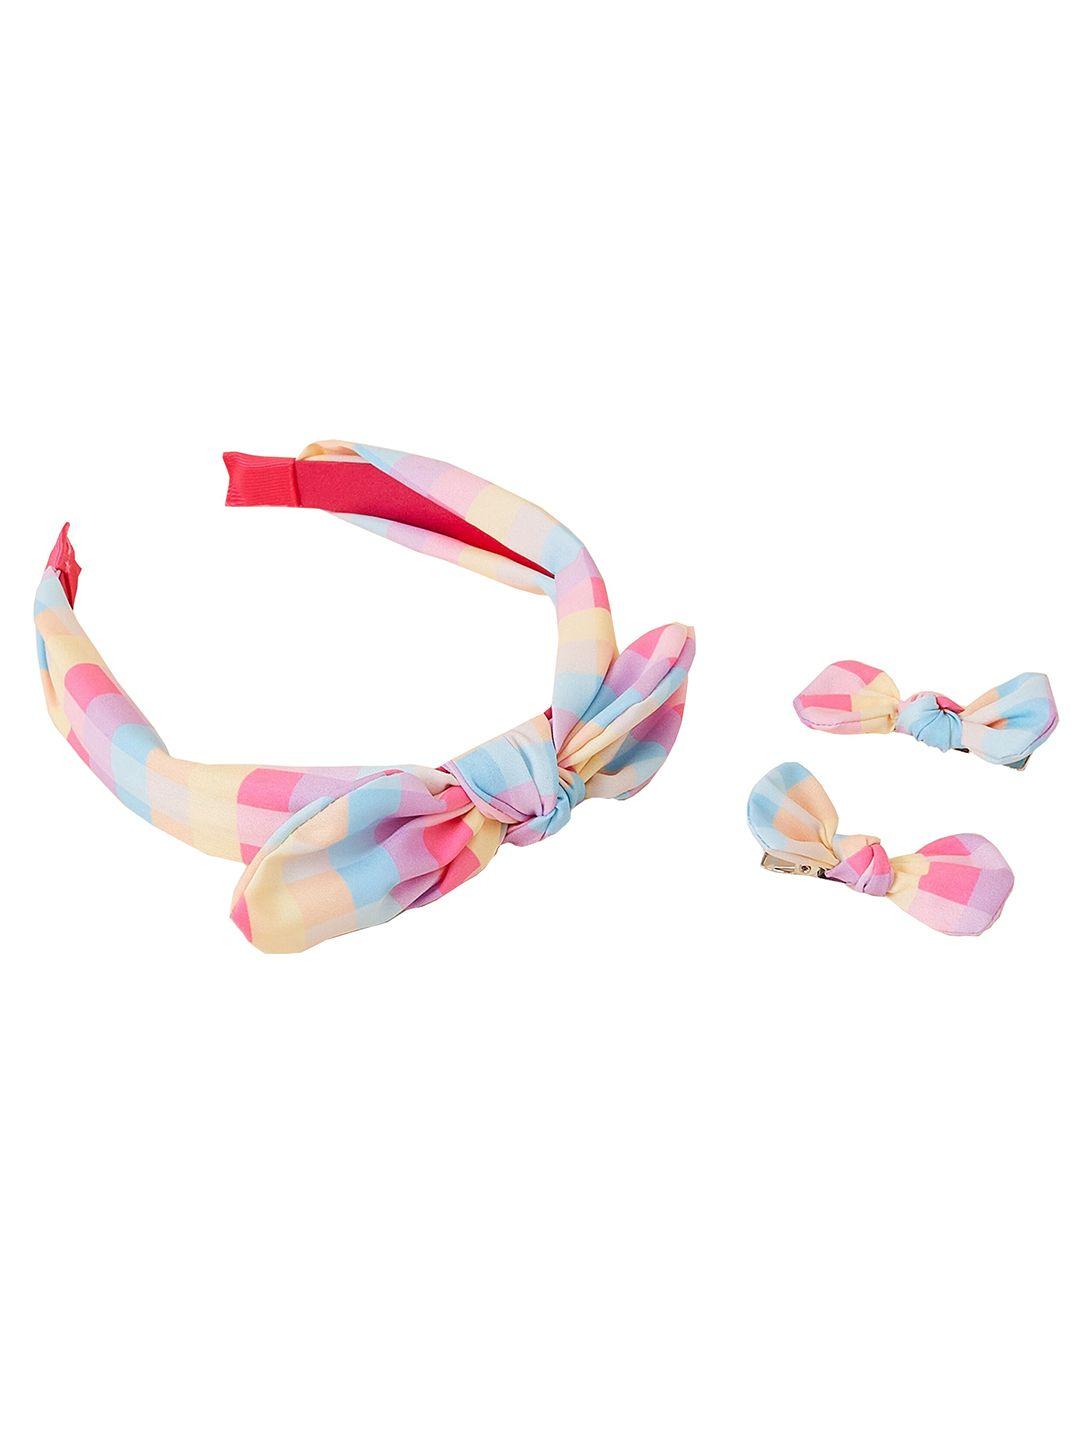 accessorize girls set of 3 hair accessory set